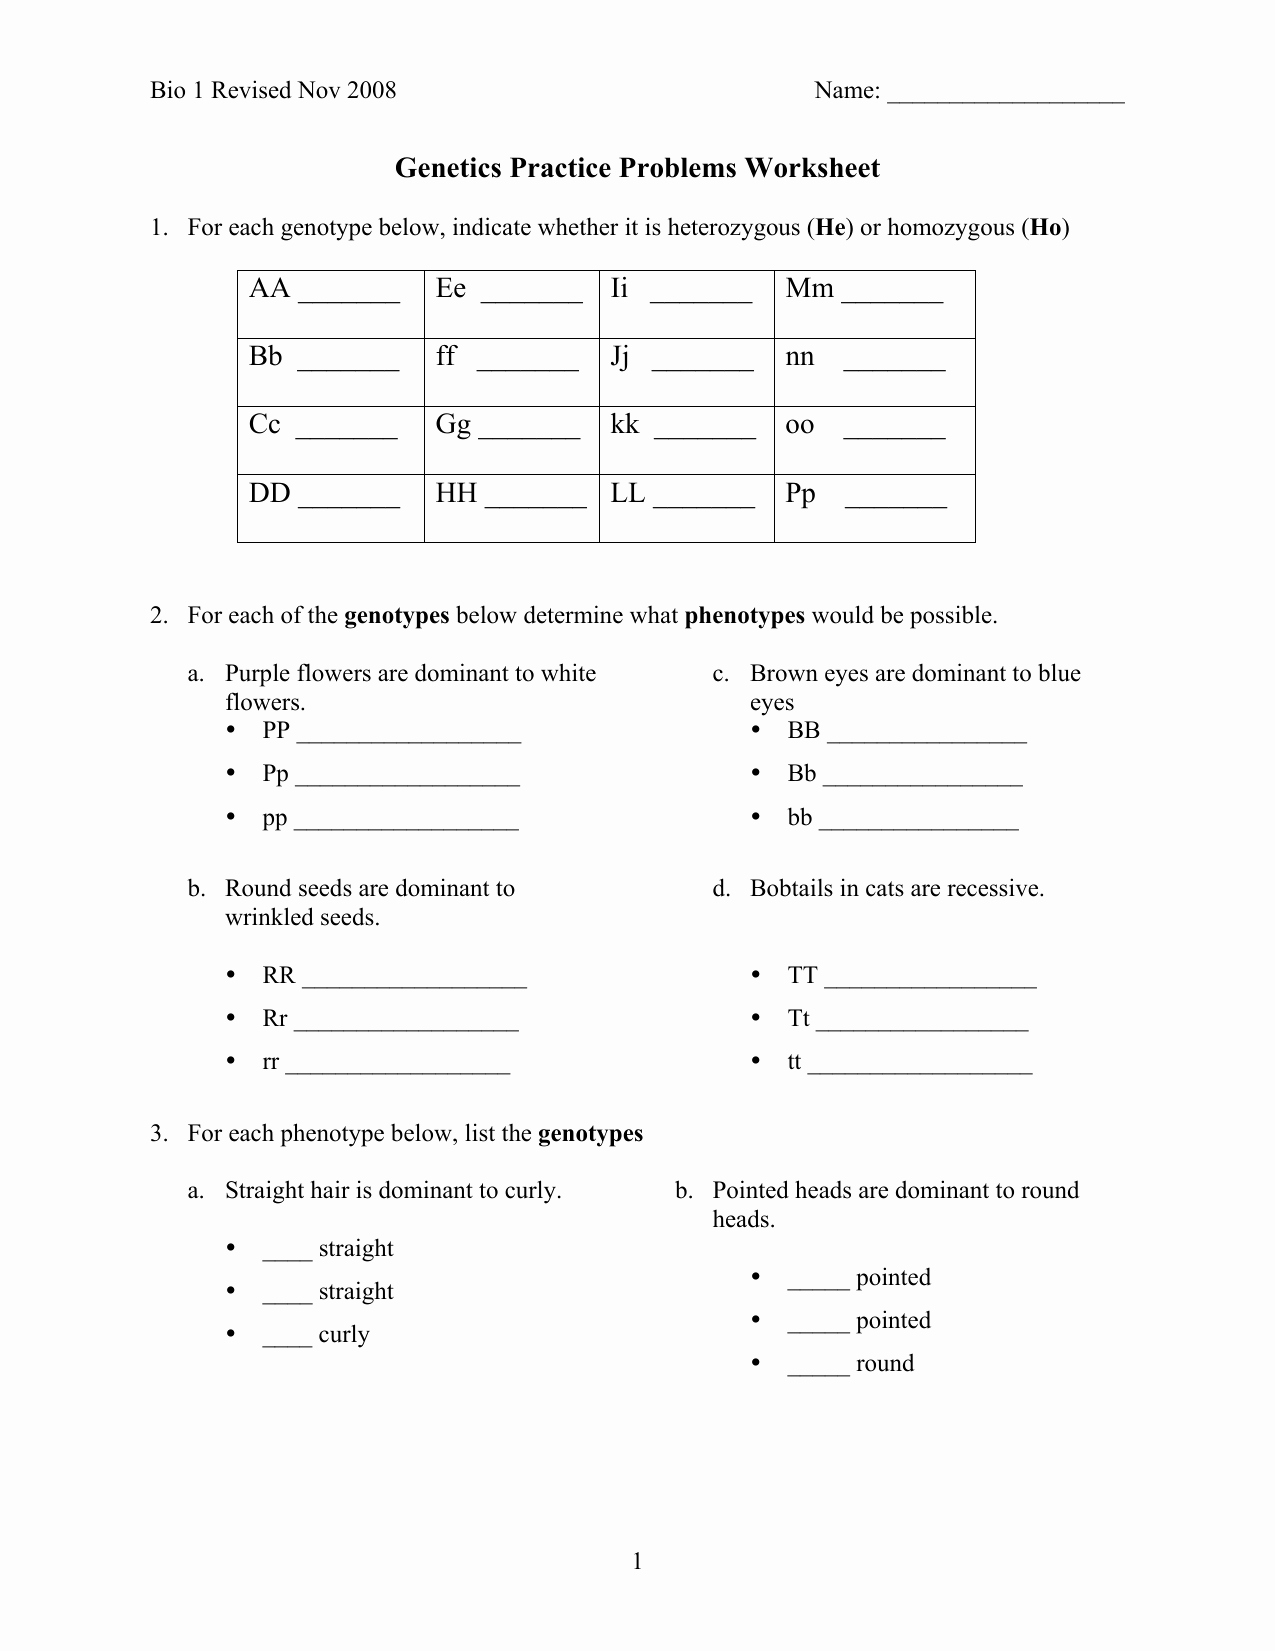 Genotypes and Phenotypes Worksheet Answers Awesome Genotype and Phenotype Worksheet